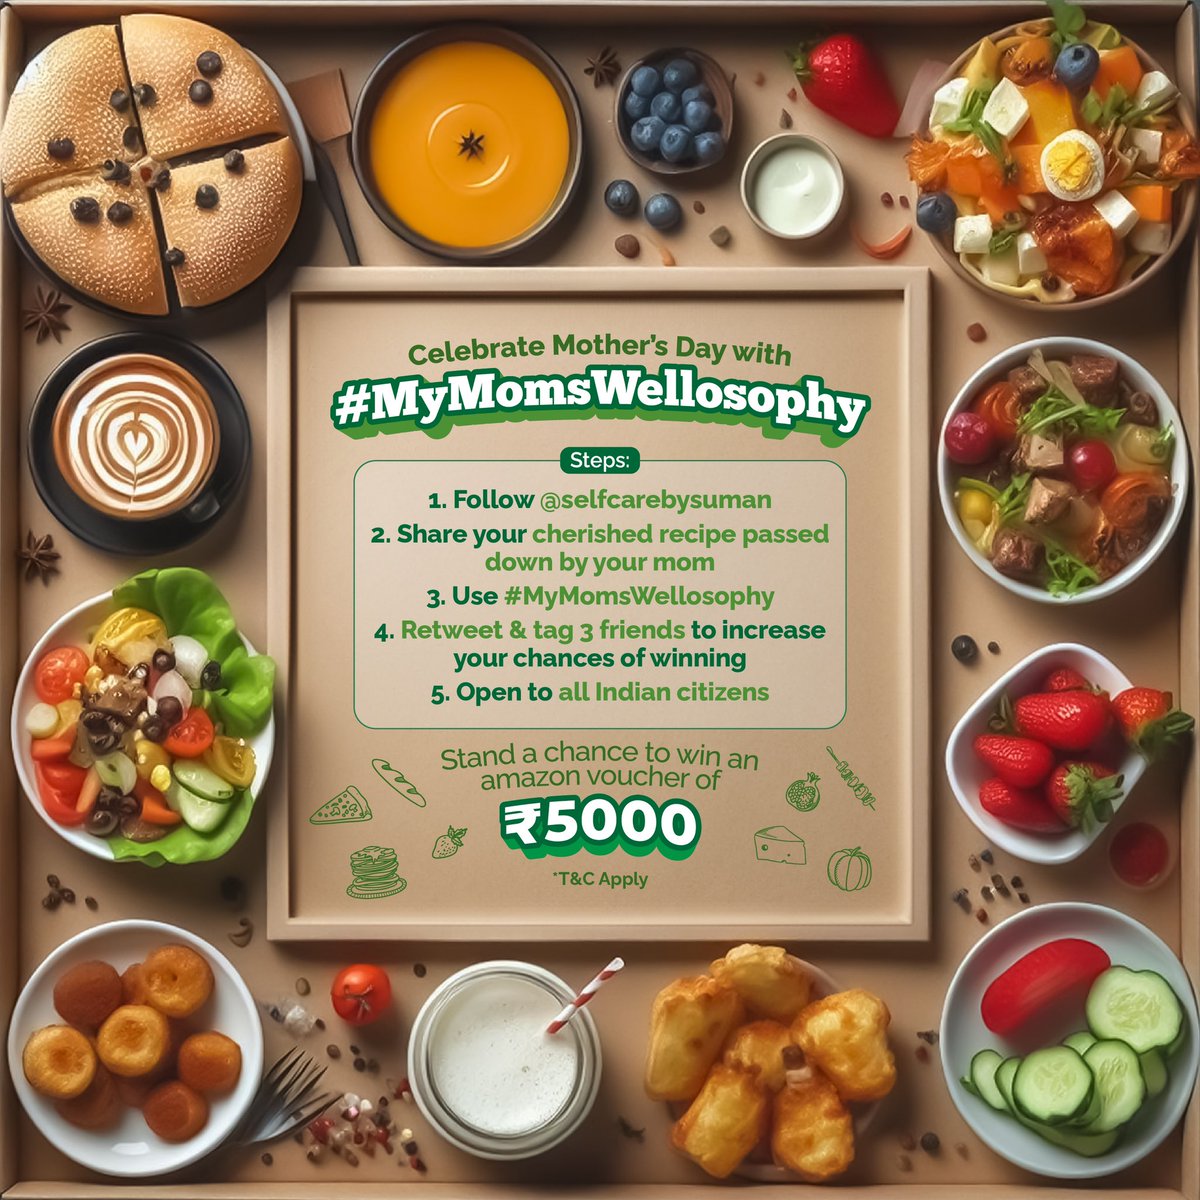 Share your Family Recipe(s) with me using #MyMomsWellosophy, for a chance to win an Amazon voucher worth ₹5,000! 😊 Don't forget to follow me for more updates. Can't wait to see your wonderful recipes! *T&C Apply: shorturl.at/pqHZ7 #ContestAlert #MothersDay